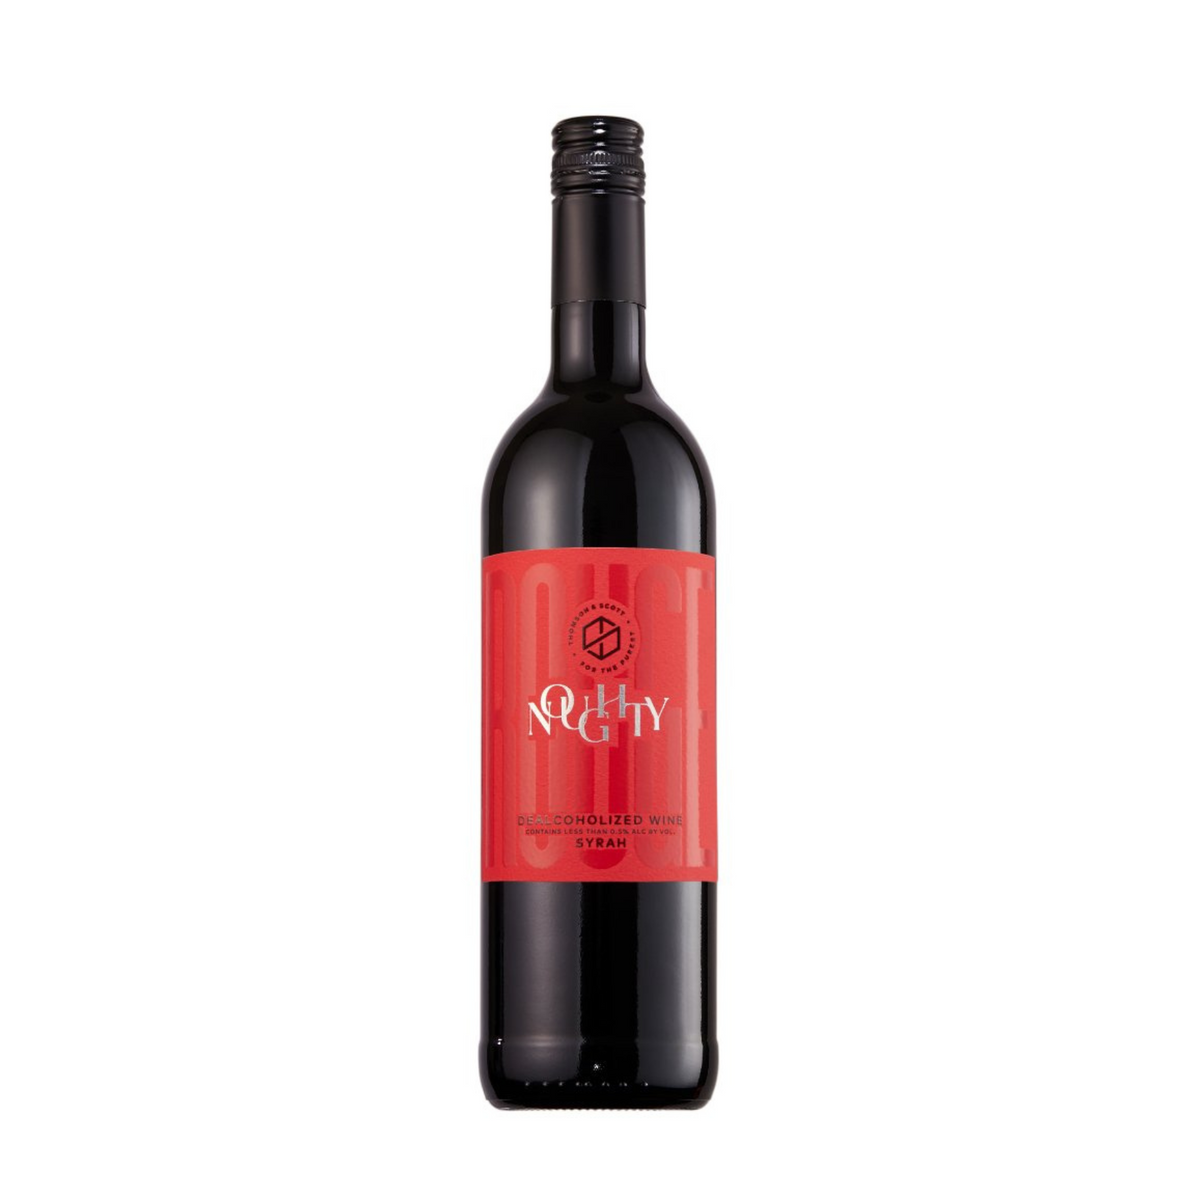 bottle of noughty rouge dealcoholized red wine. black bottle with red label